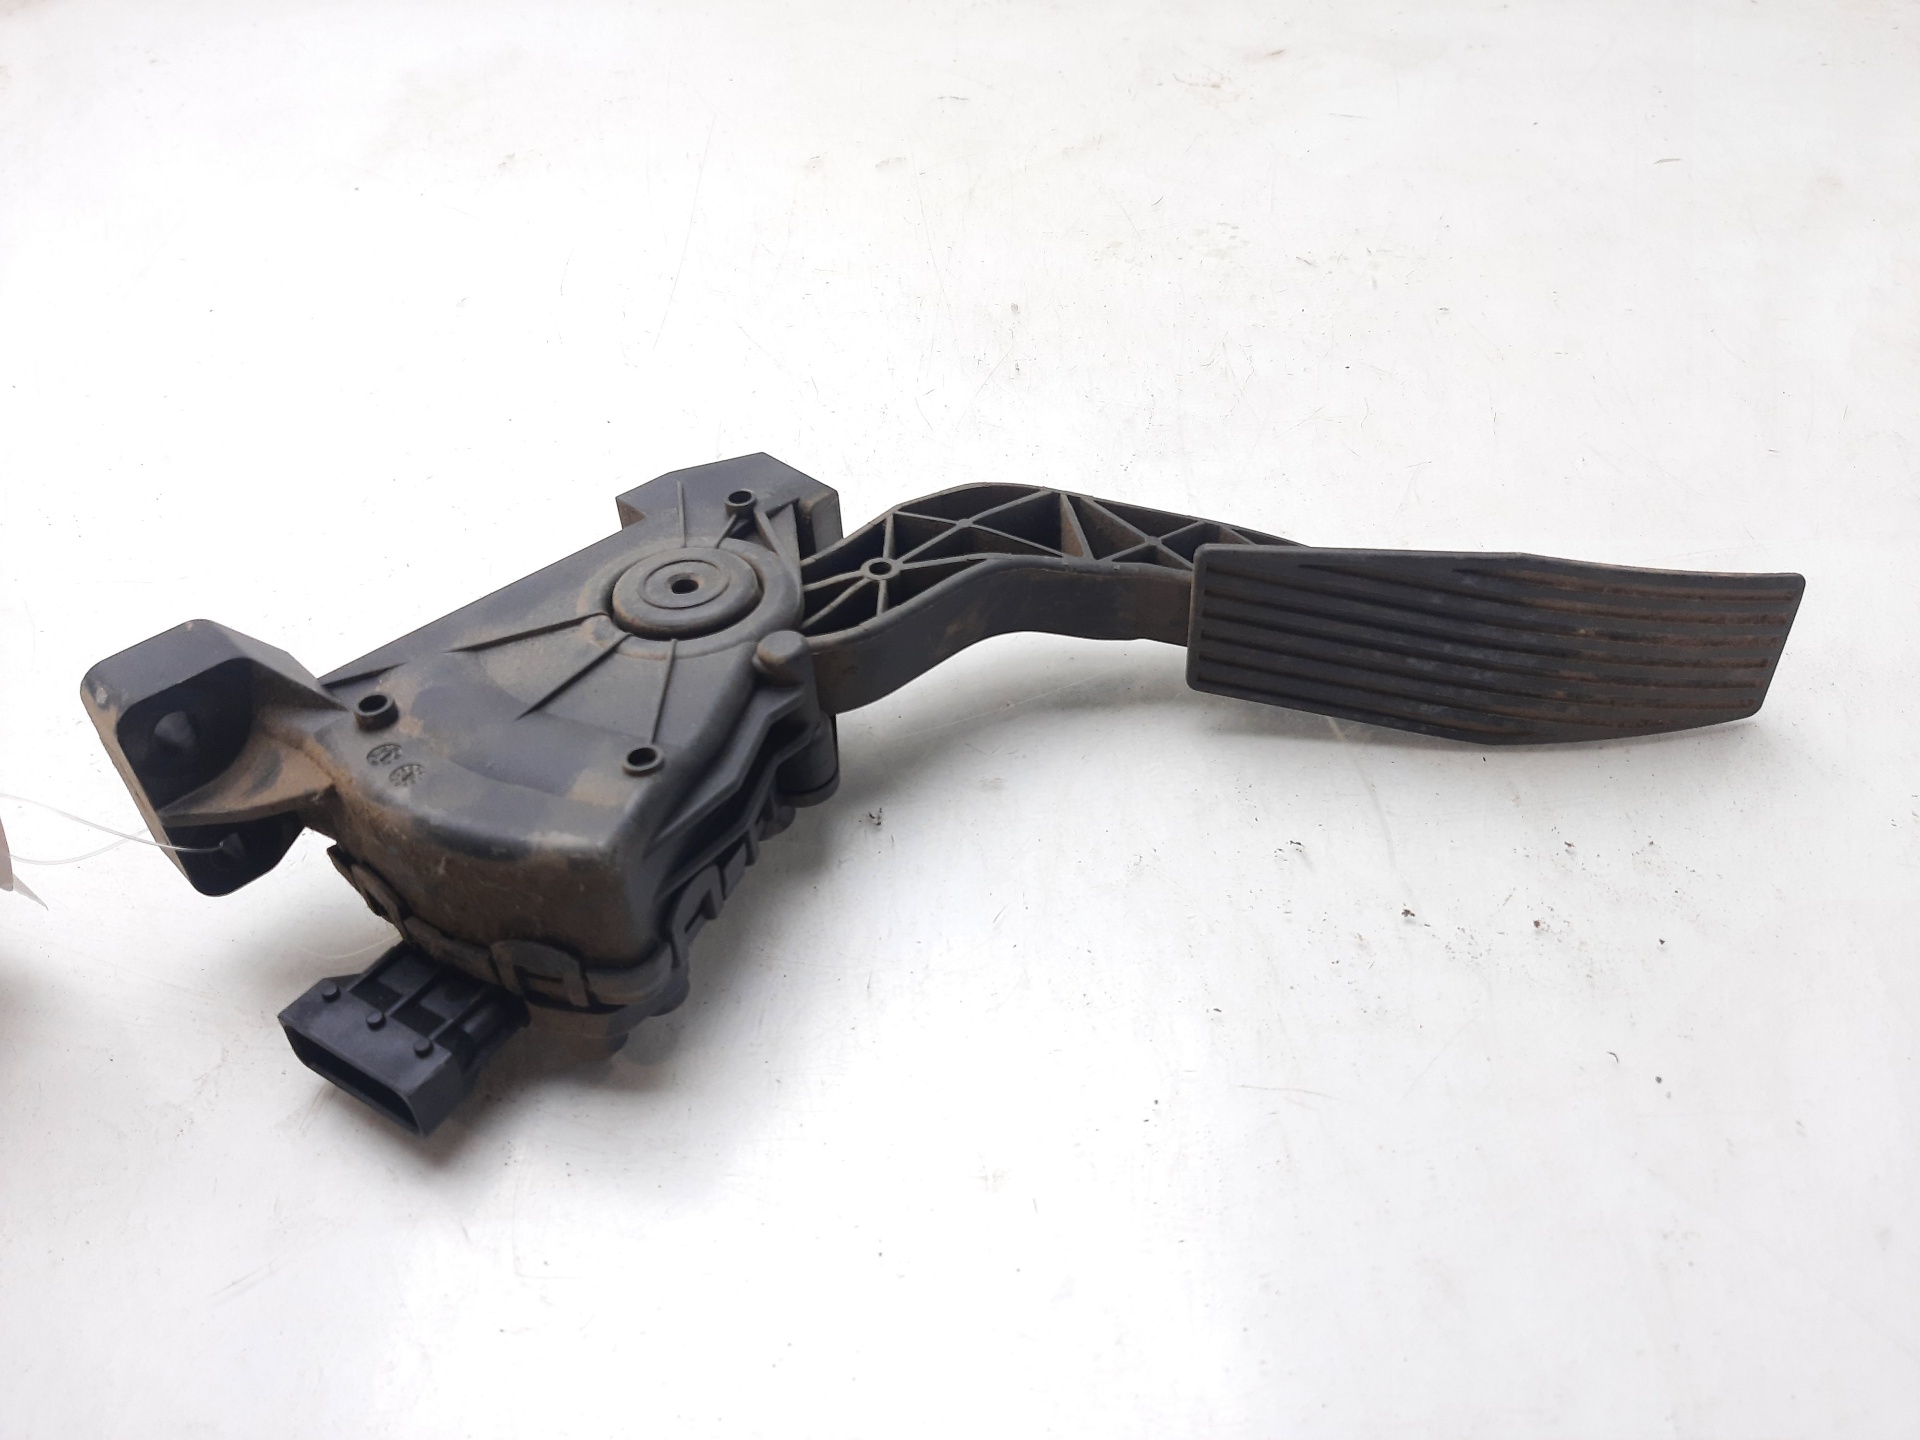 OPEL Vectra Other Body Parts 9186724 23971871